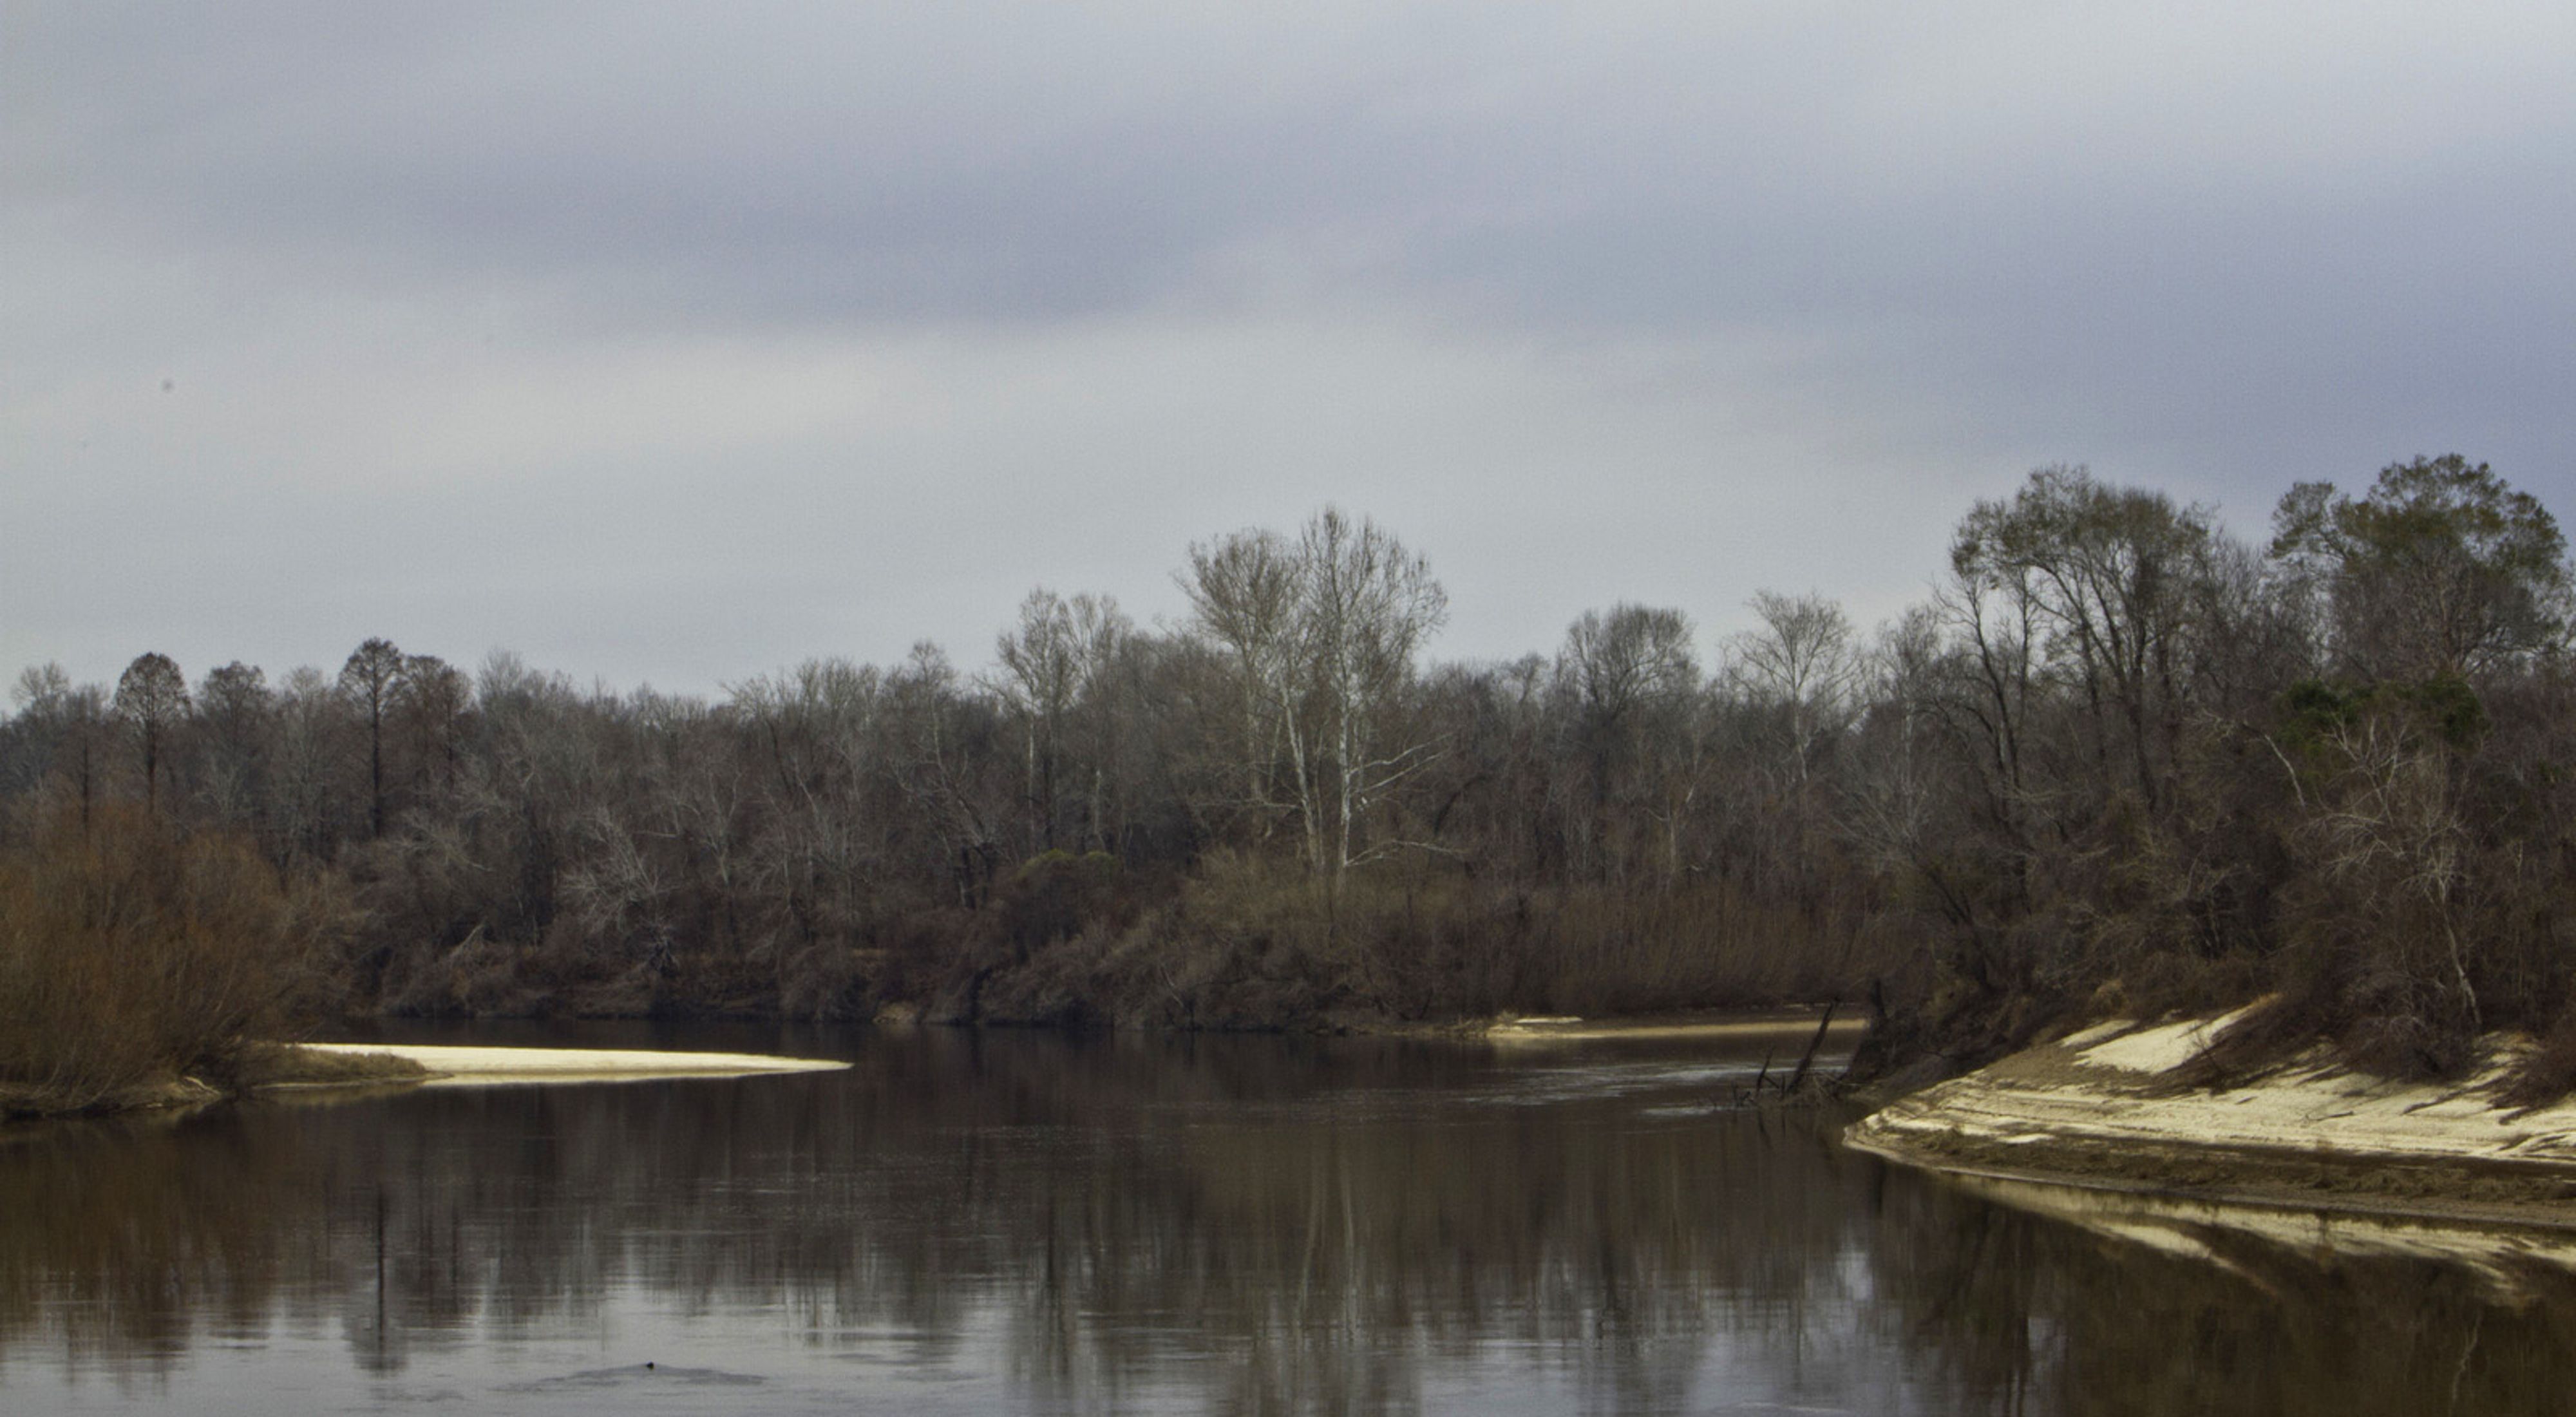 The Leaf and Chickasaway Rivers converge to create the Pascaoula River in Mississippi on the East Gulf Coastal Plain. 